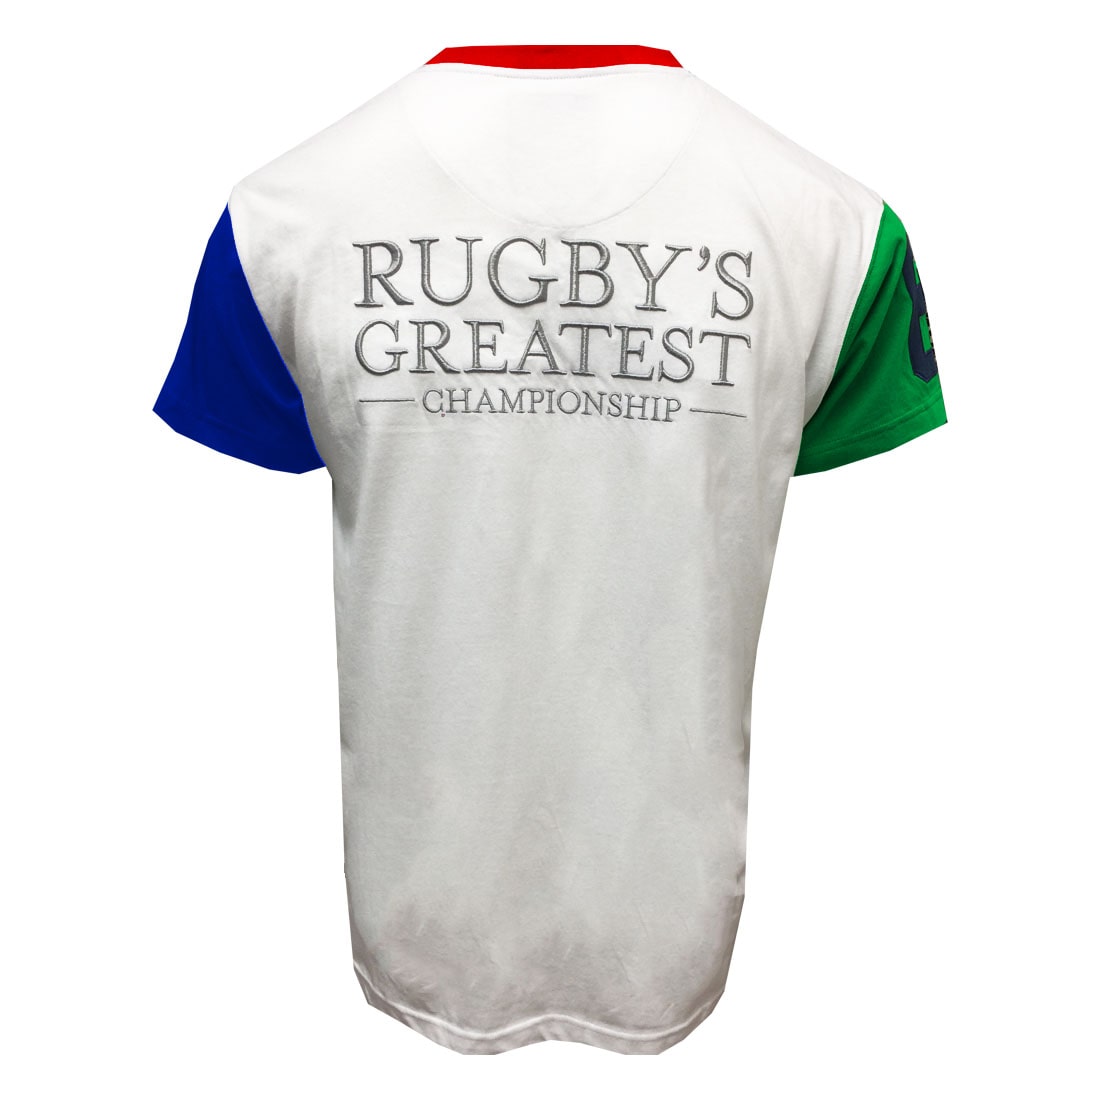 Show your support for Rugby's Greatest Championship with this premium Guinness UK Six Nations Premium Colour Block T-Shirt.